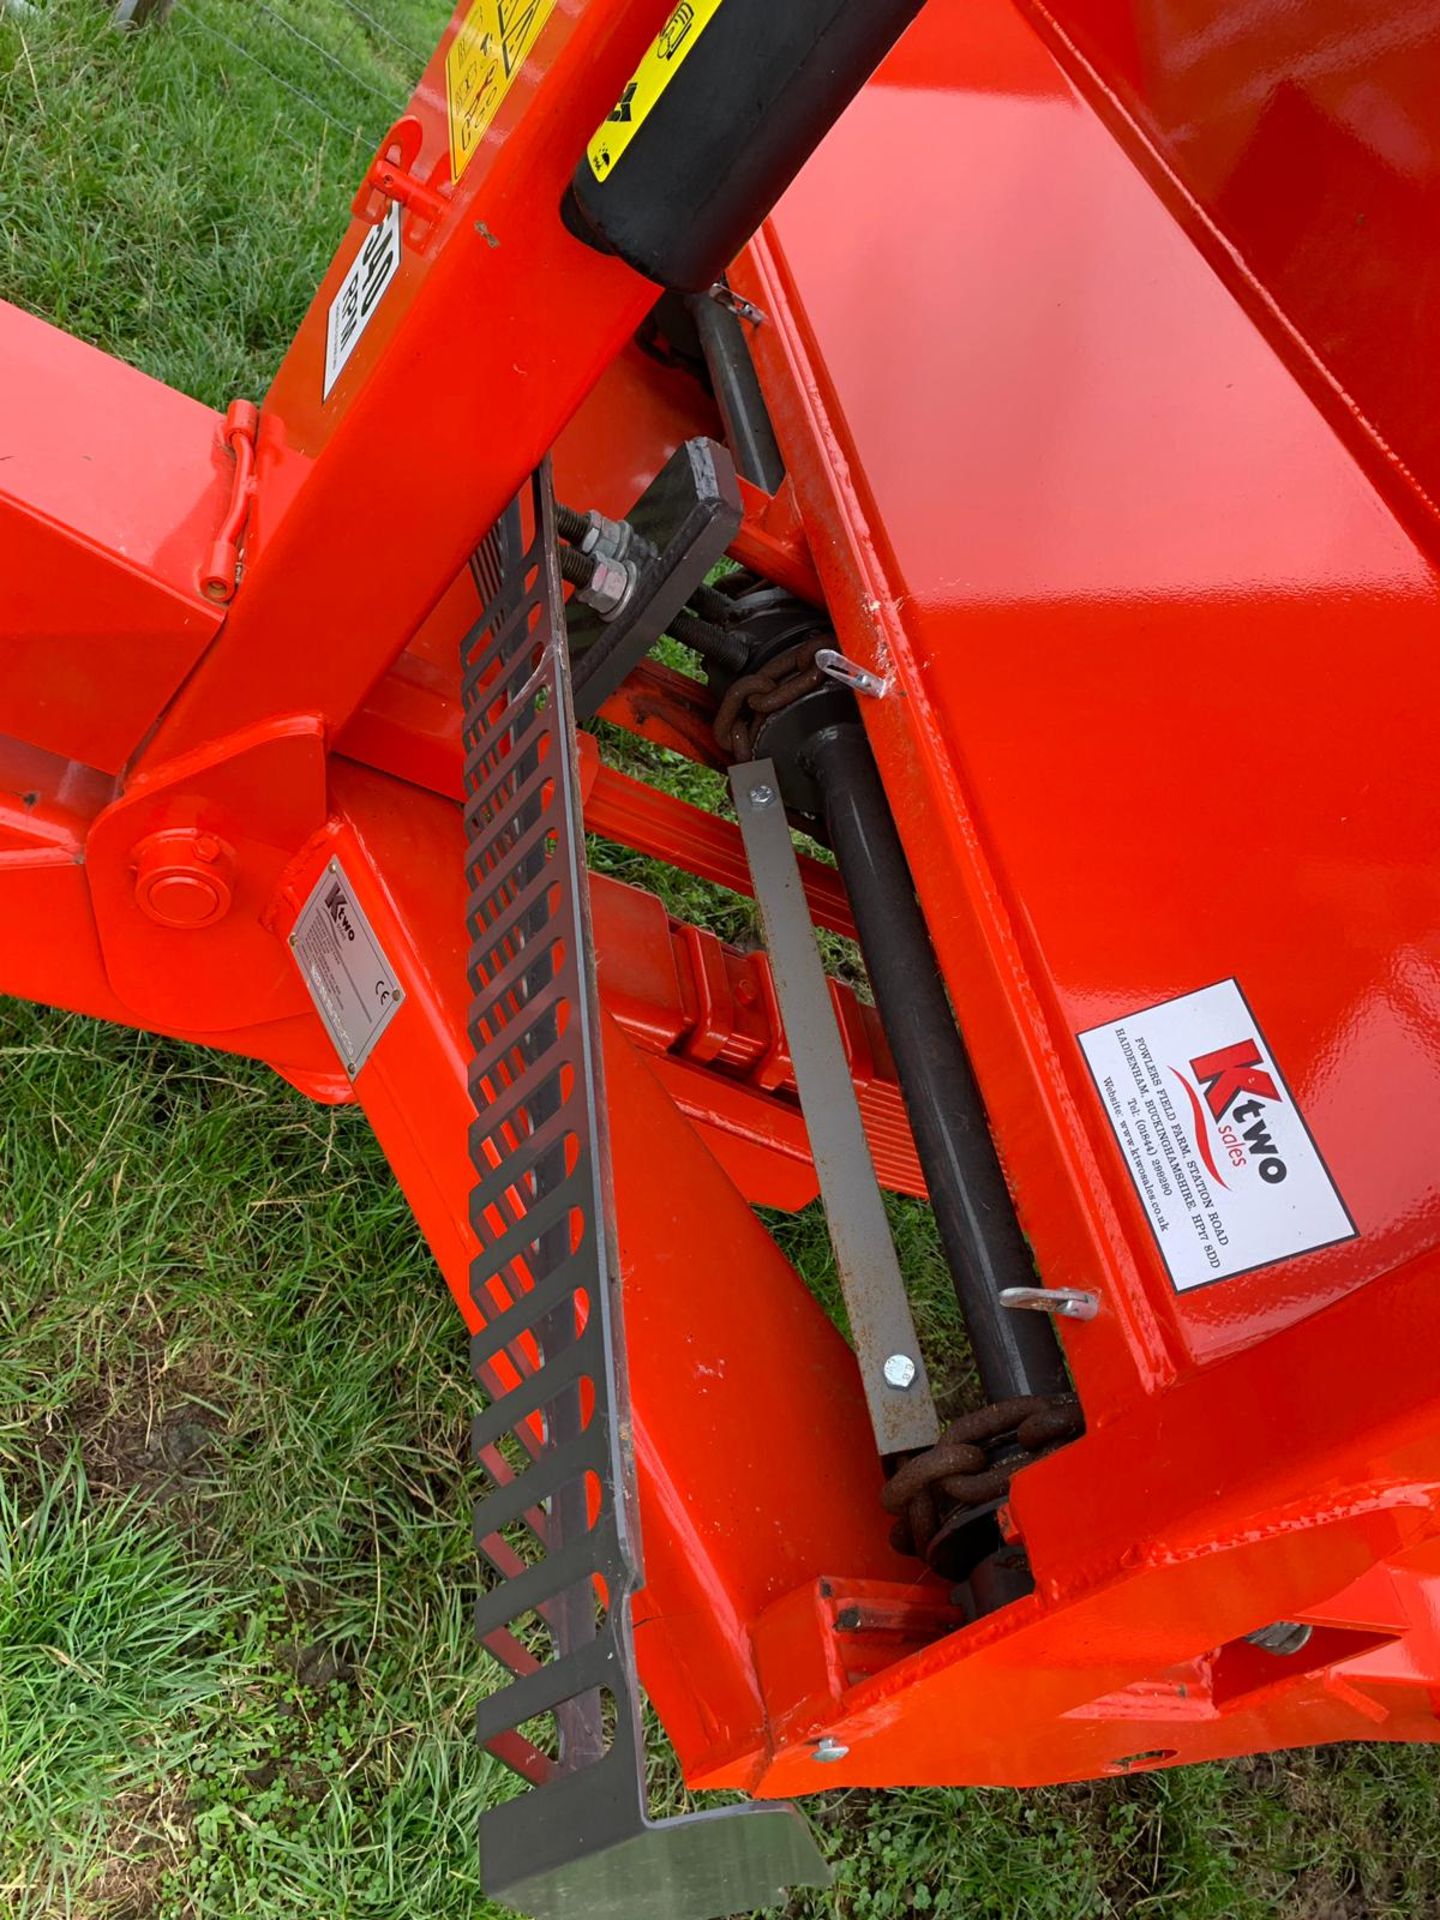 BRAND NEW 12 TONNE KTWO MUCK SPREADER, NEVER BEEN USED *PLUS VAT* - Image 11 of 11